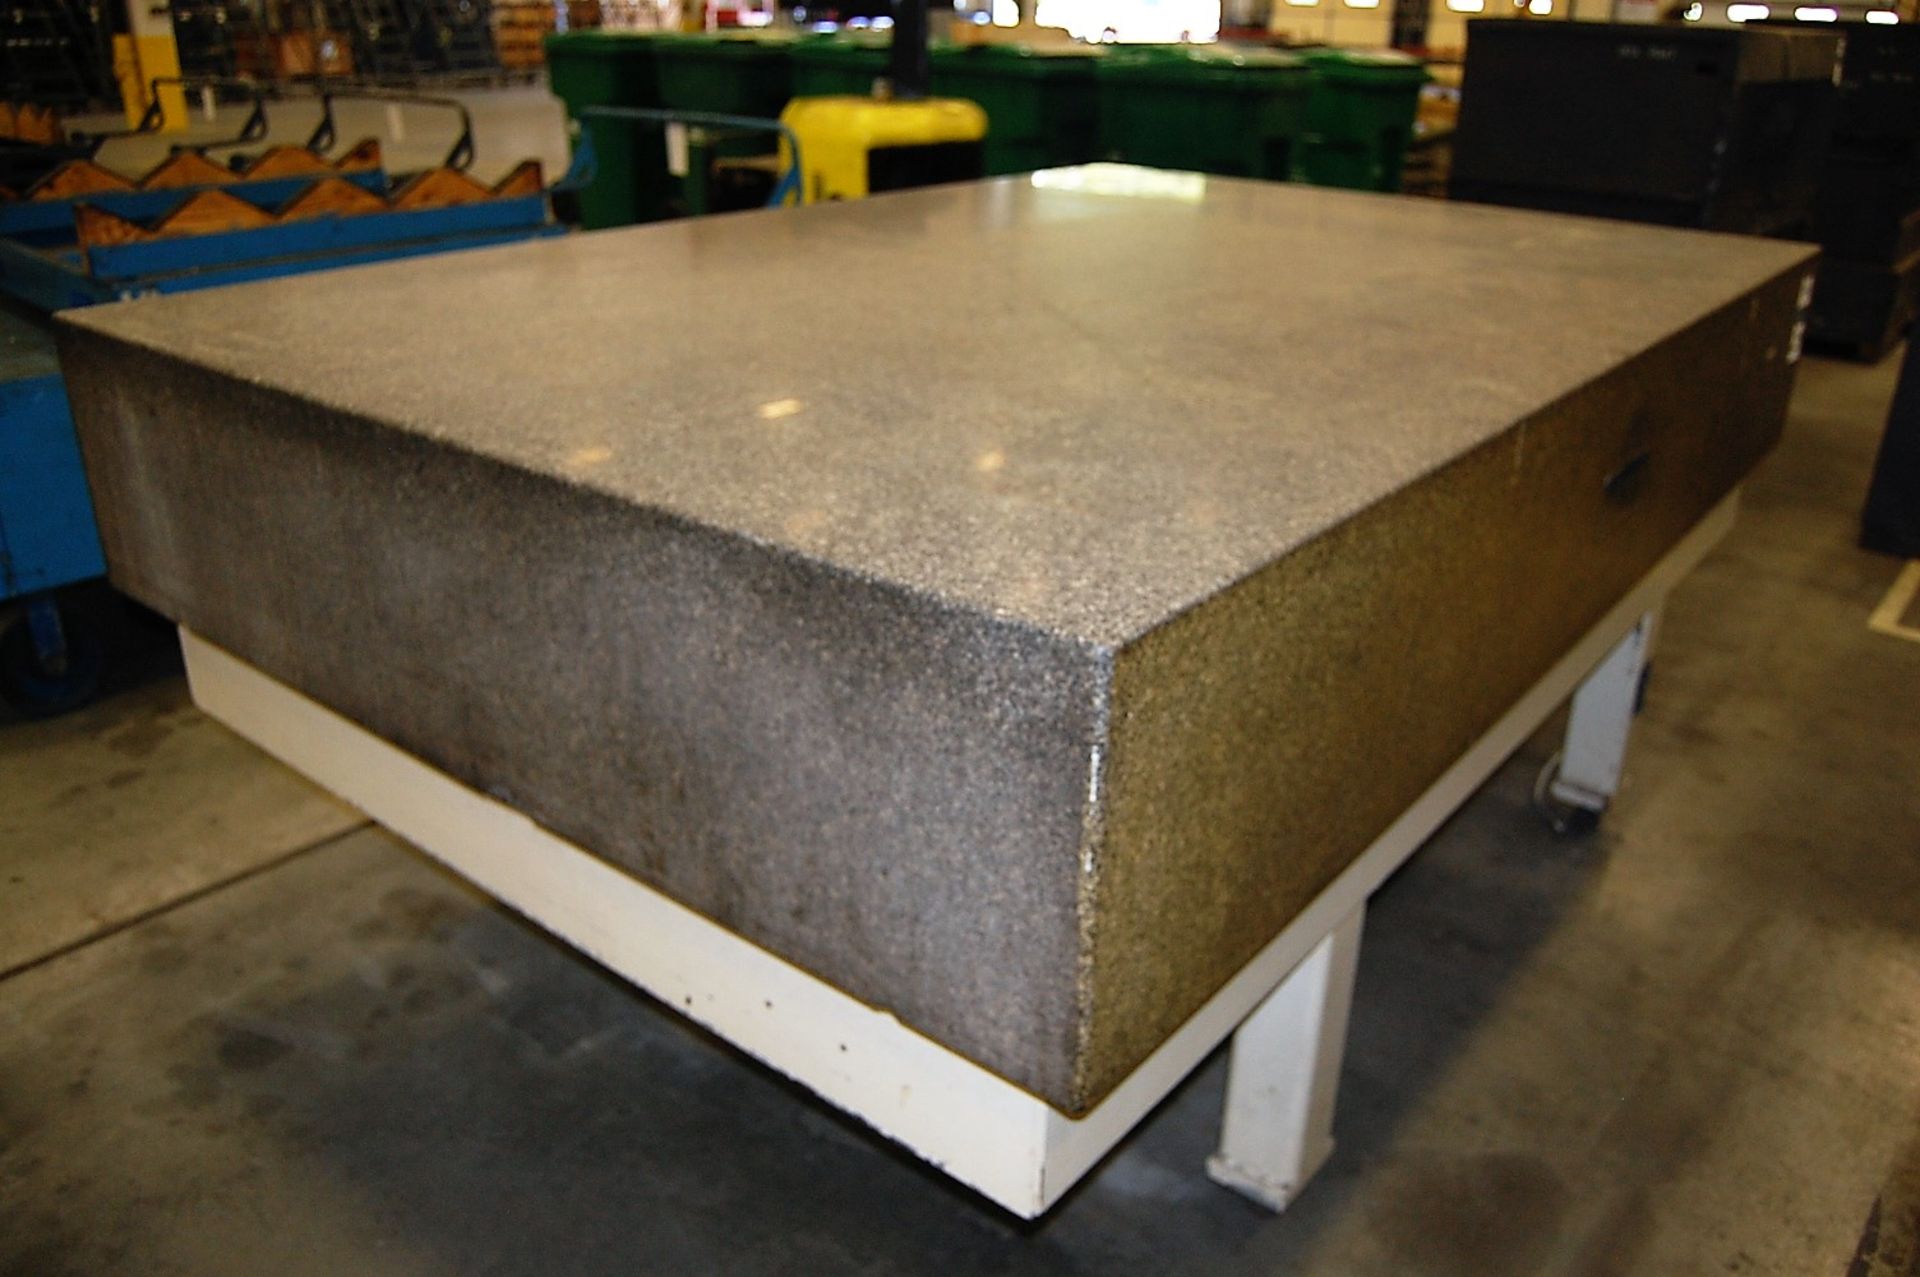 60" x 90" x 14" Granite Surface Plate - Image 2 of 4